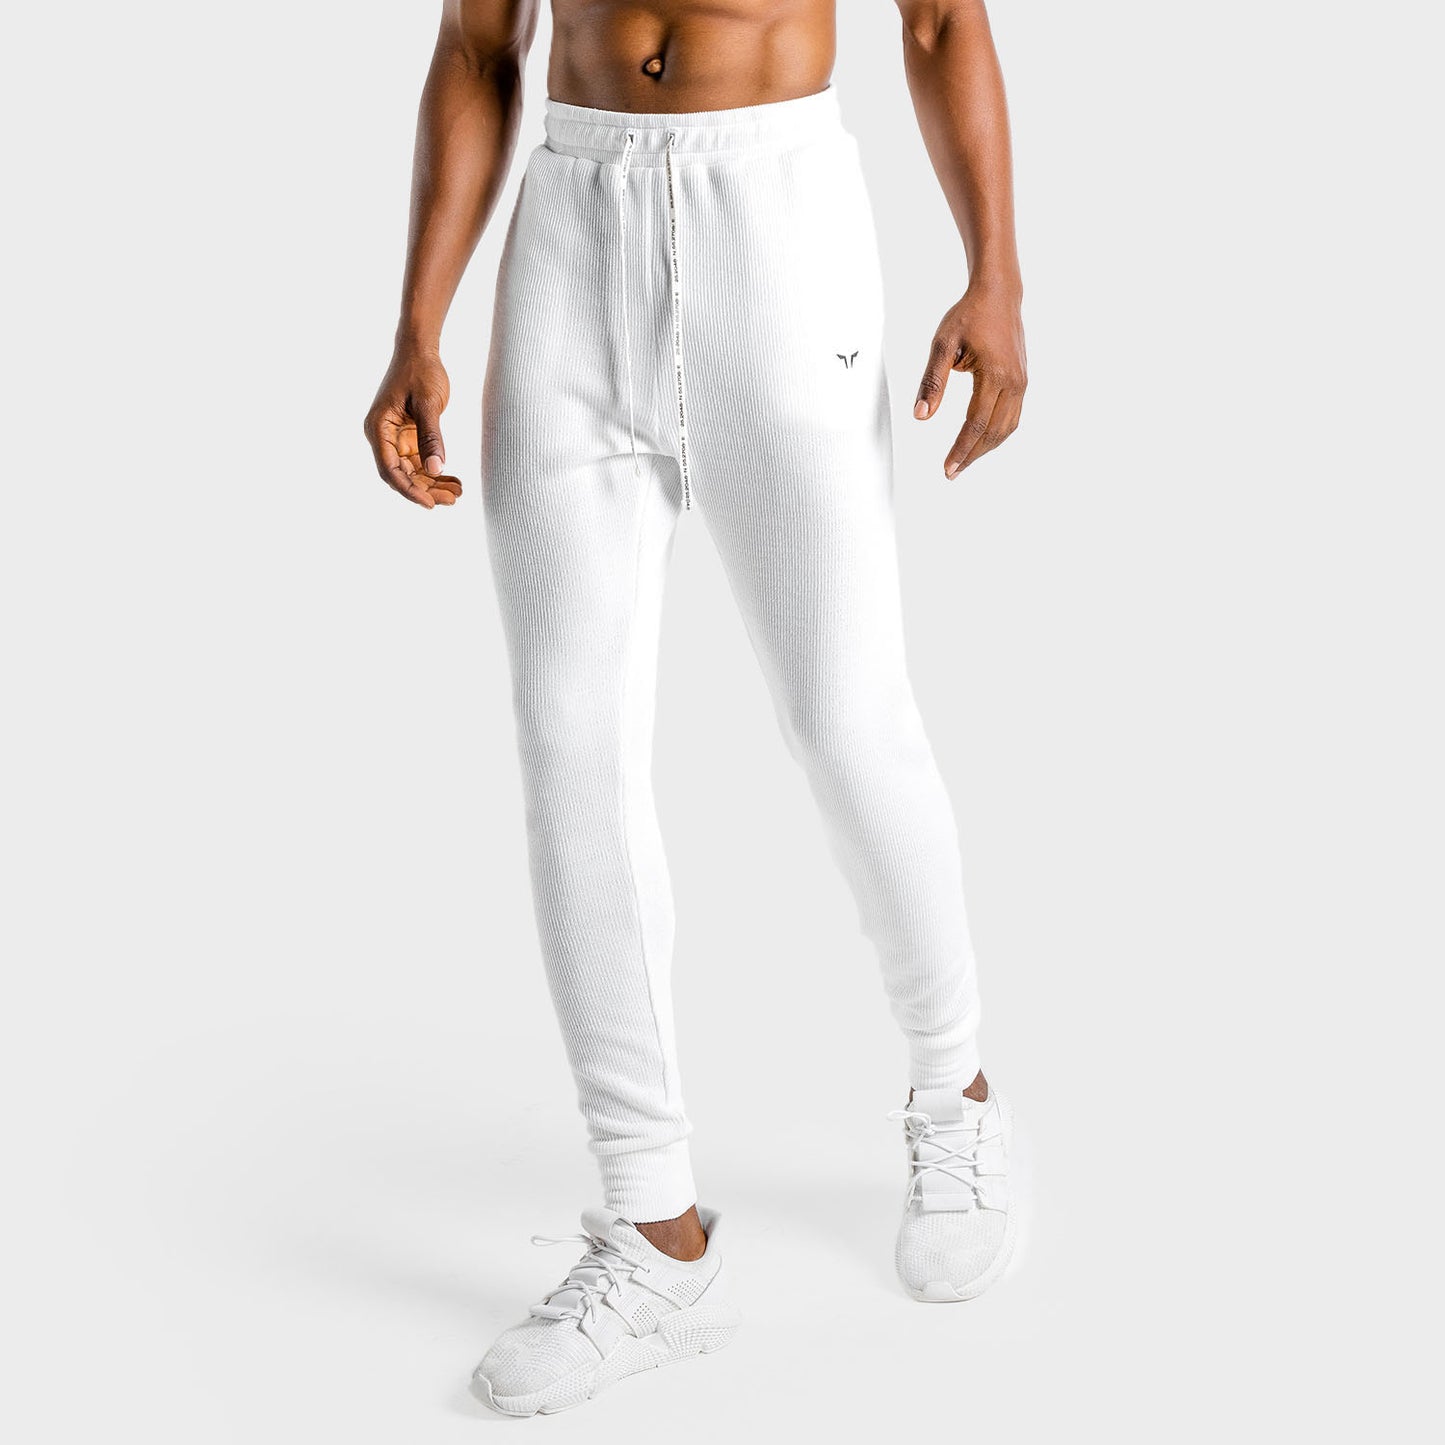 squatwolf-gym-pants-for-women-luxe-joggers-white-workout-clothes